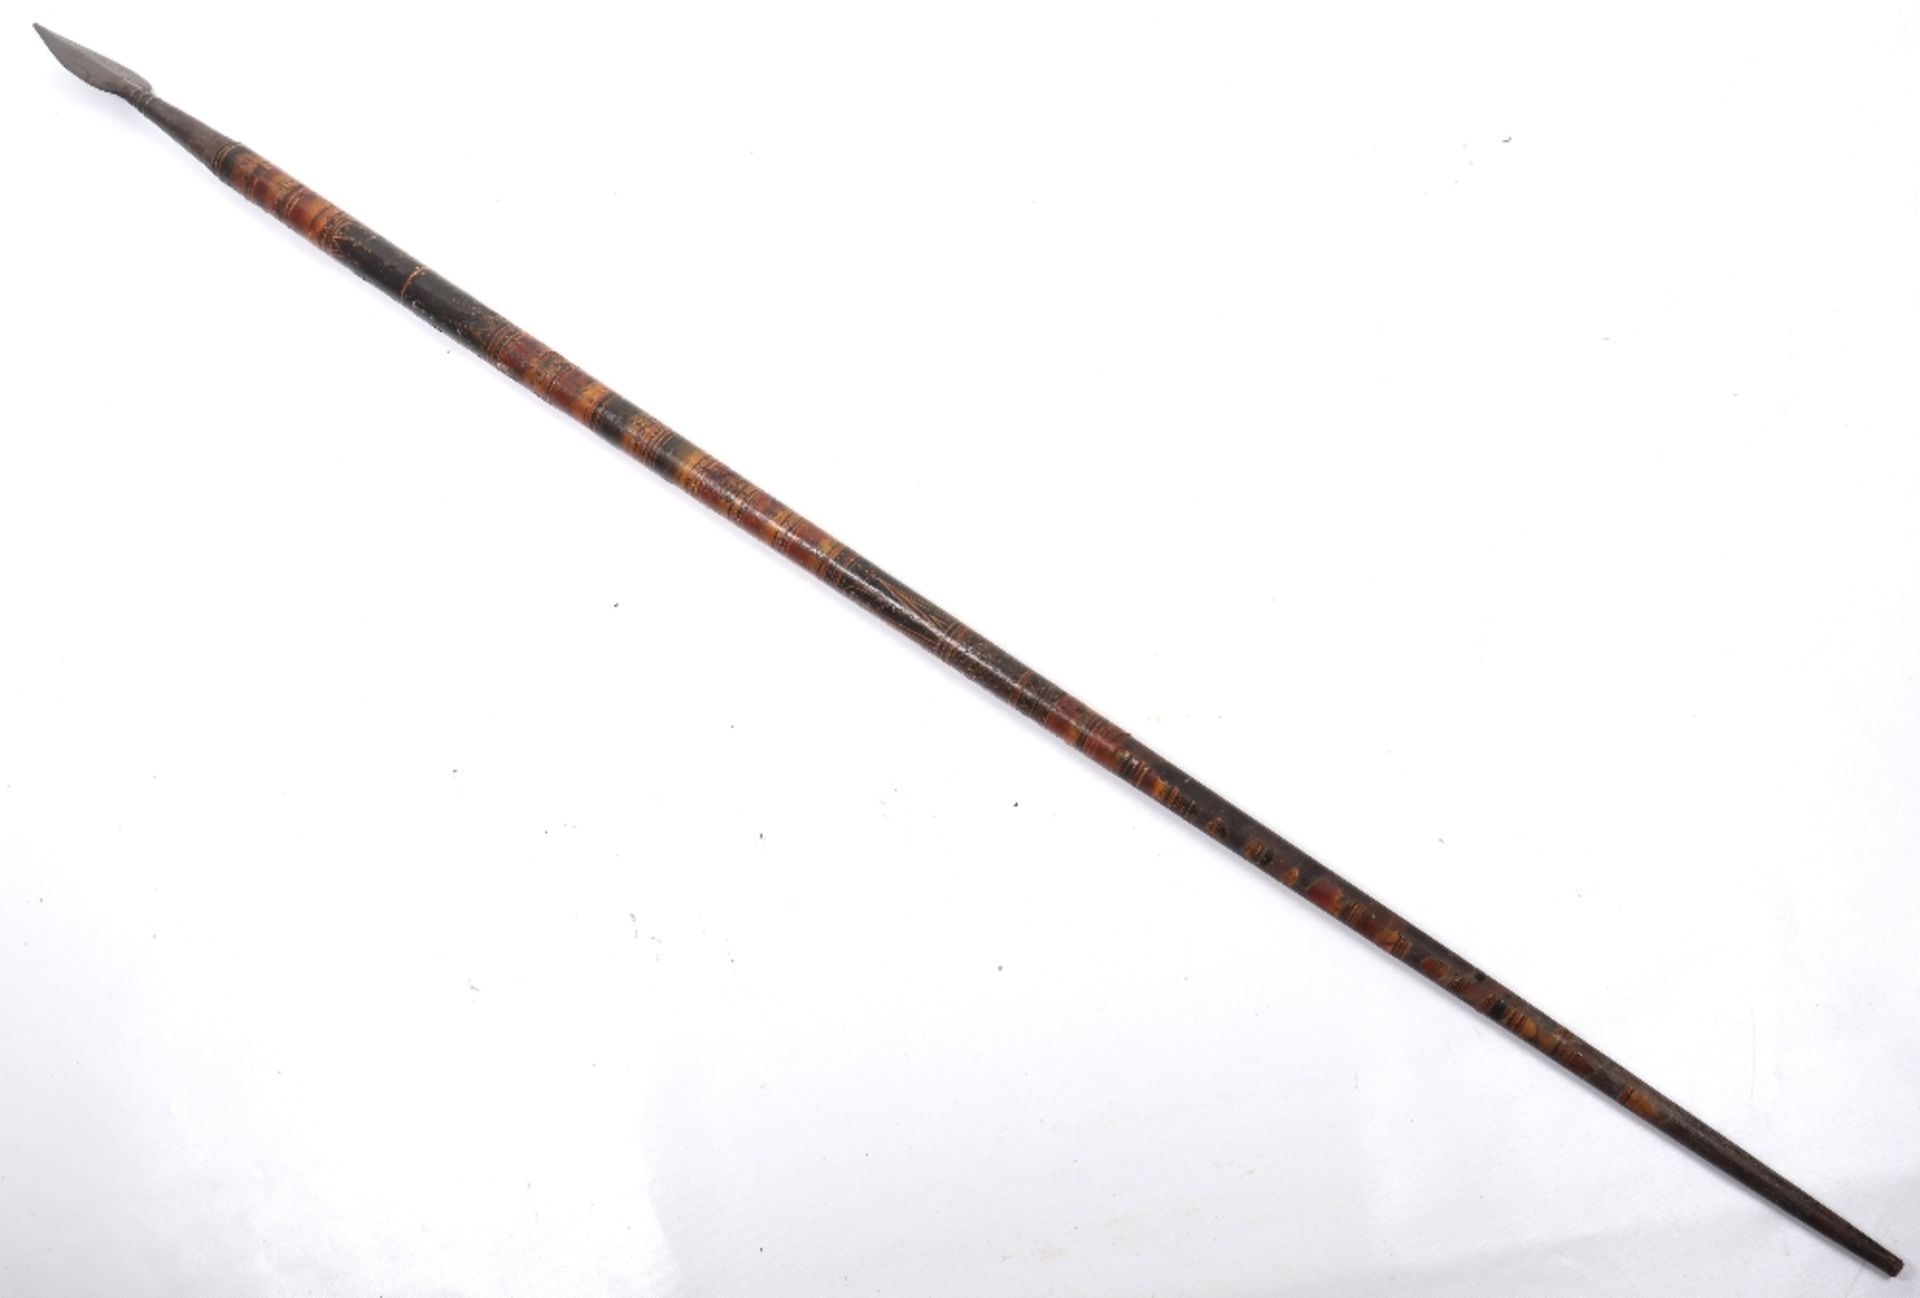 Ceylonese Spear Patisthanaya, Probably 18th or 19th Century - Image 8 of 9